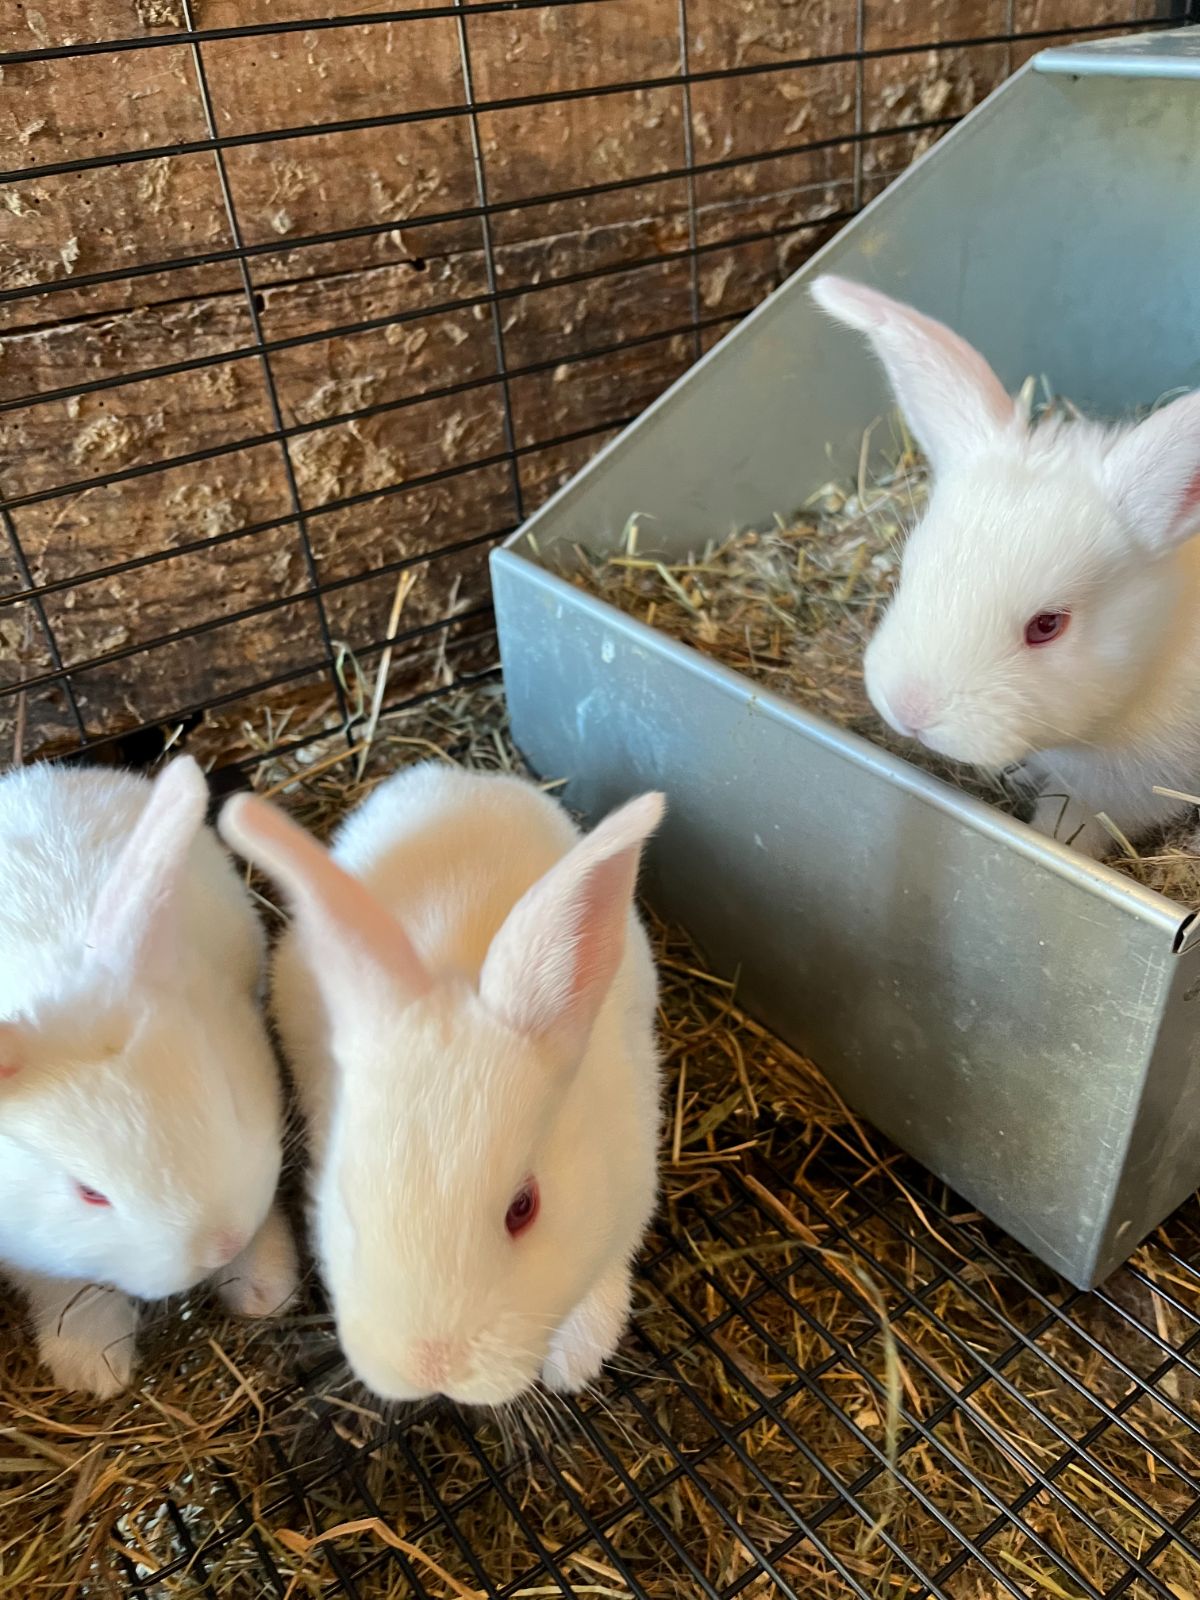 Young rabbit kits that will need housing soon